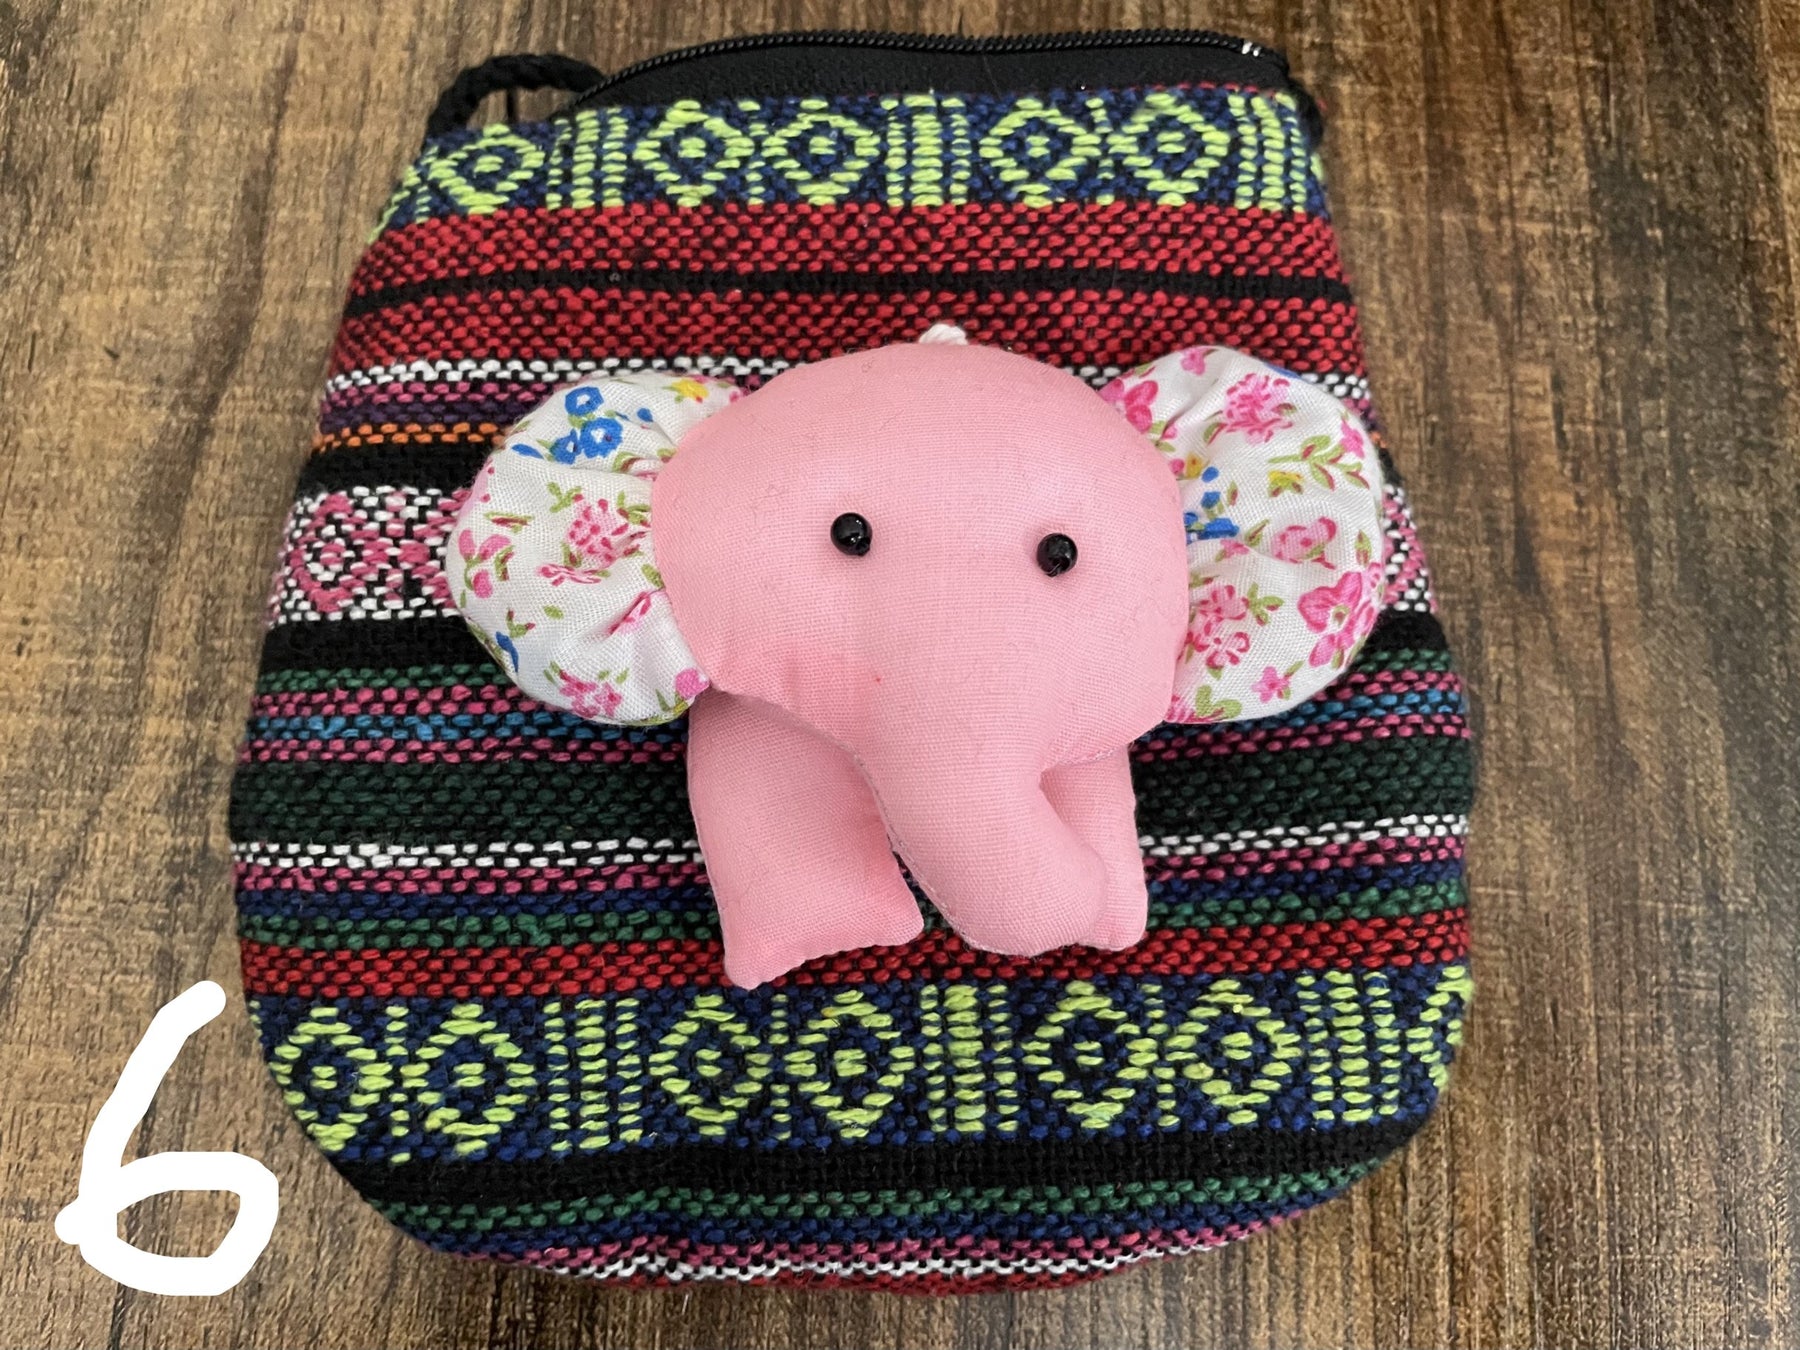 Buy Bohemian Purse Wallet Canvas Elephant Pattern Handbag with Coin Pocket  and Strap (Large, Black Elephant) at Amazon.in